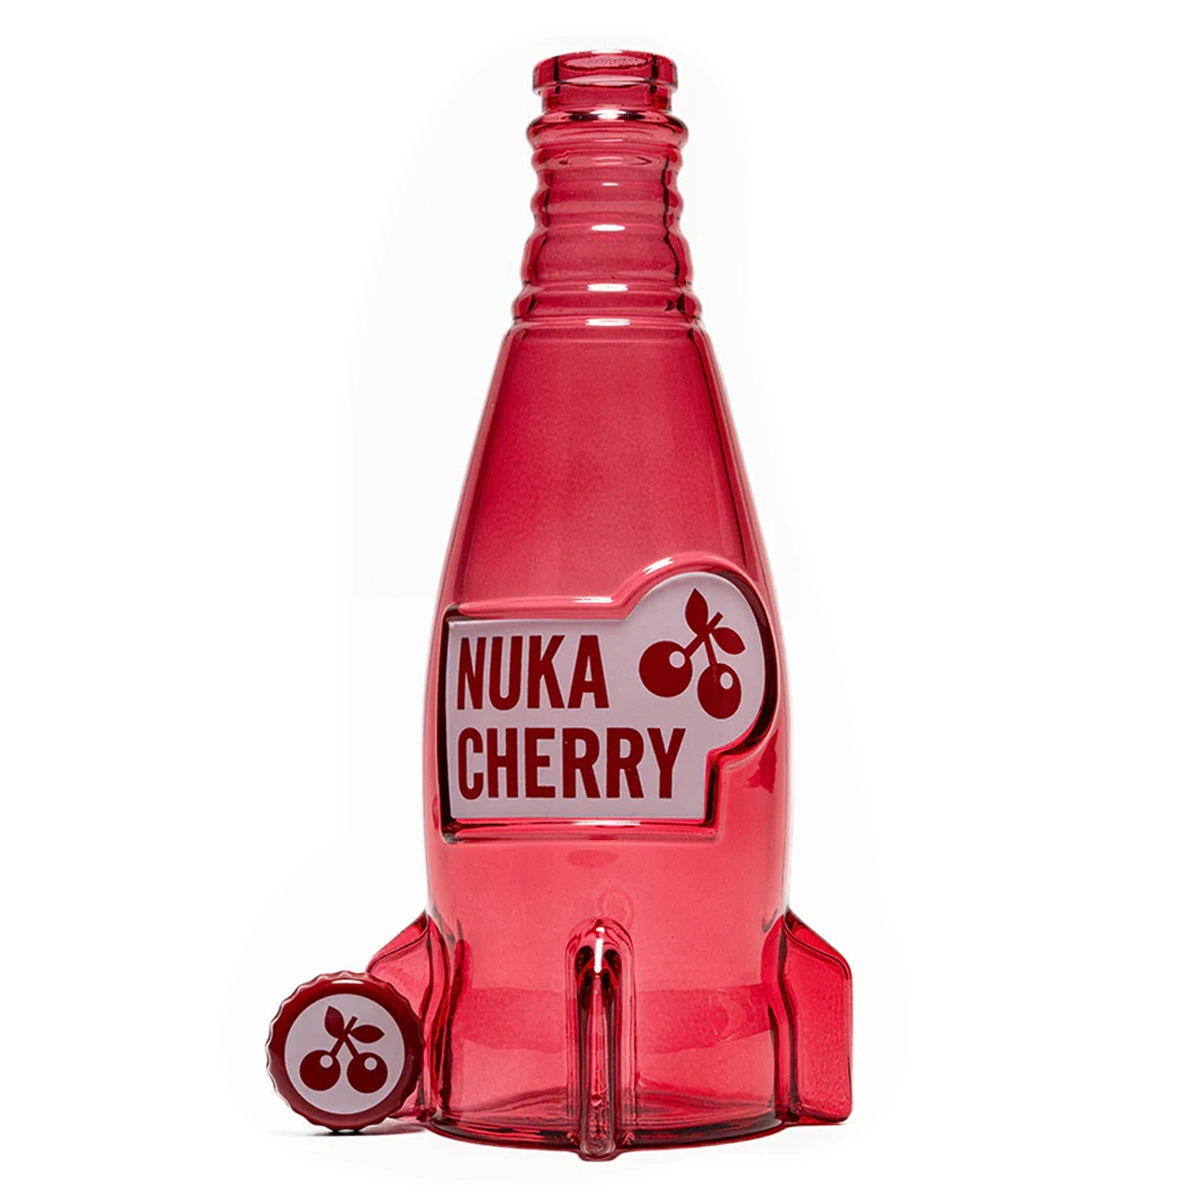 Fallout "Nuka Cola Cherry" Glass Bottle and Caps Image 2